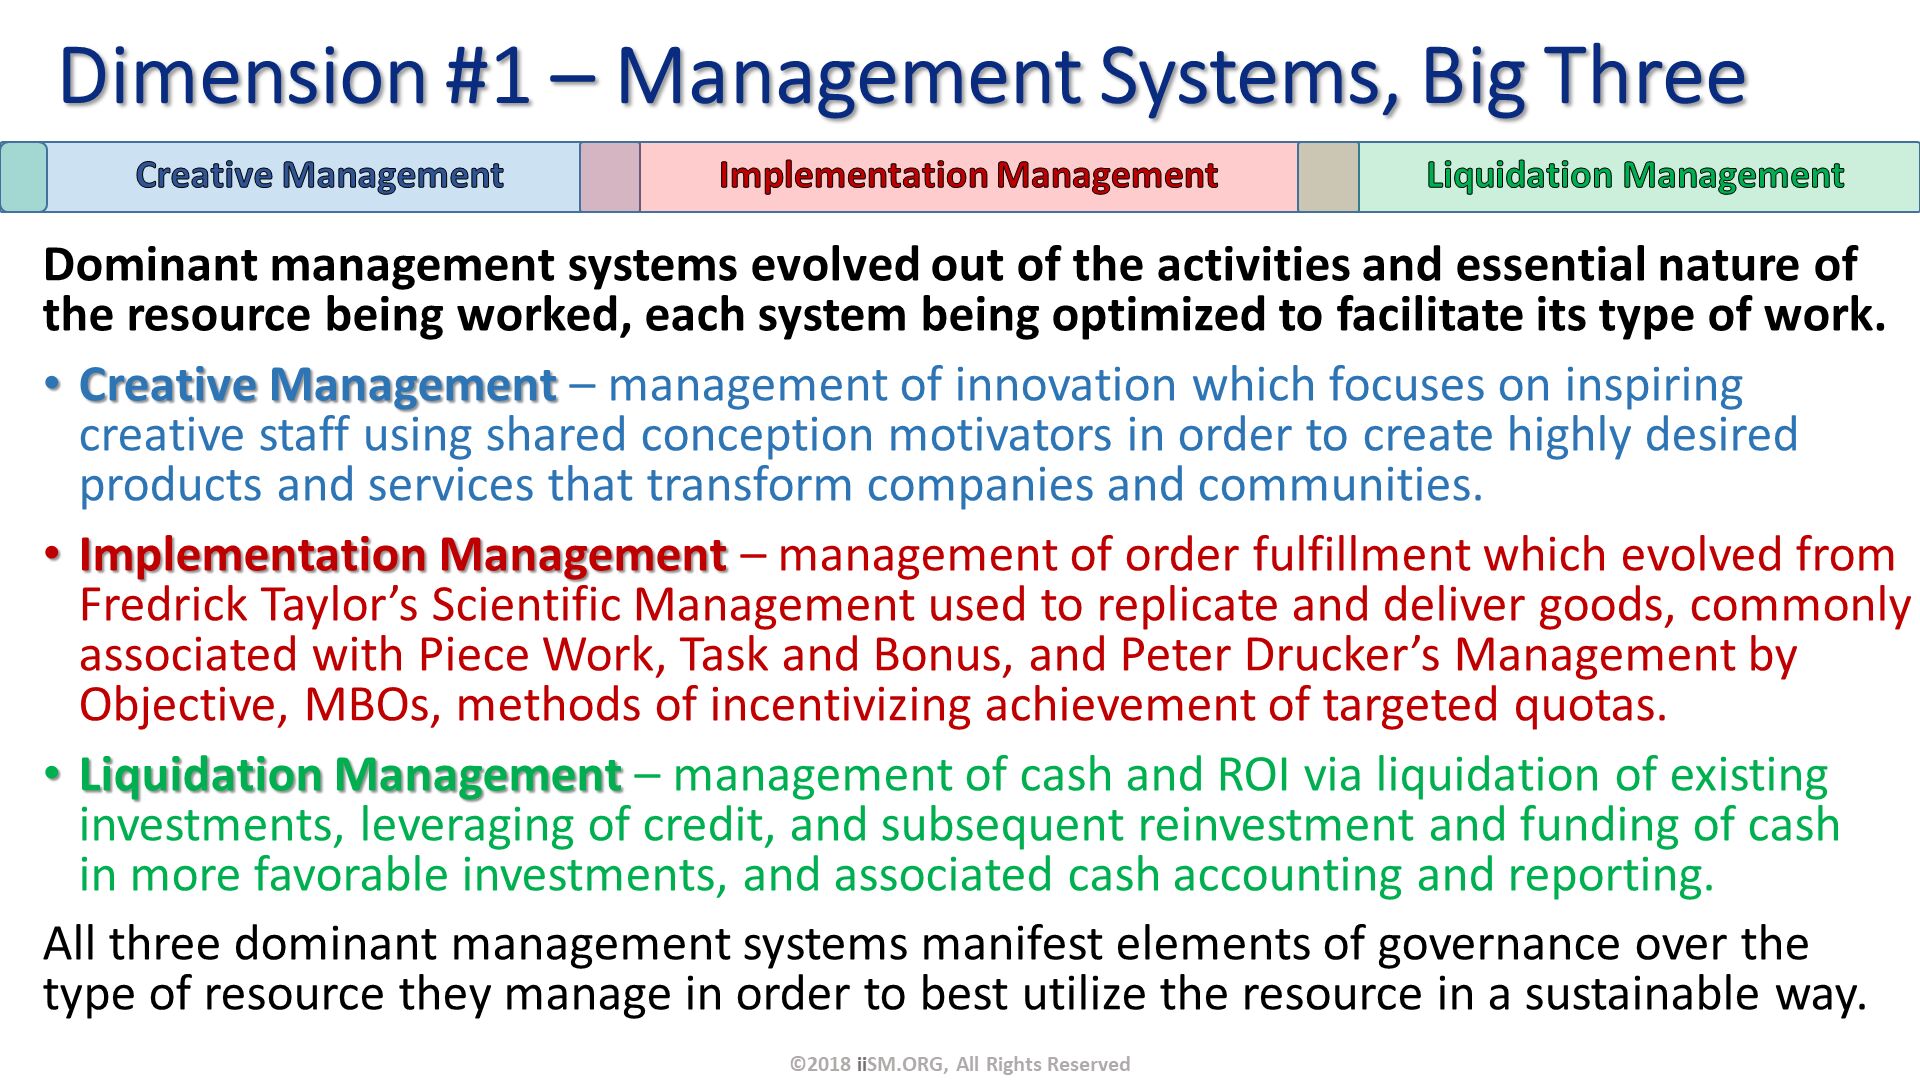 Dominant management systems evolved out of the activities and essential nature of the resource being worked, each system being optimized to facilitate its type of work. 
Creative Management – management of innovation which focuses on inspiring creative staff using shared conception motivators in order to create highly desired products and services that transform companies and communities.
Implementation Management – management of order fulfillment which evolved from Fredrick Taylor’s Scientific Management used to replicate and deliver goods, commonly associated with Piece Work, Task and Bonus, and Peter Drucker’s Management by Objective, MBOs, methods of incentivizing achievement of targeted quotas.
Liquidation Management – management of cash and ROI via liquidation of existing investments, leveraging of credit, and subsequent reinvestment and funding of cash in more favorable investments, and associated cash accounting and reporting. 
All three dominant management systems manifest elements of governance over the type of resource they manage in order to best utilize the resource in a sustainable way. . Dimension #1 – Management Systems, Big Three. ©2018 iiSM.ORG, All Rights Reserved. 